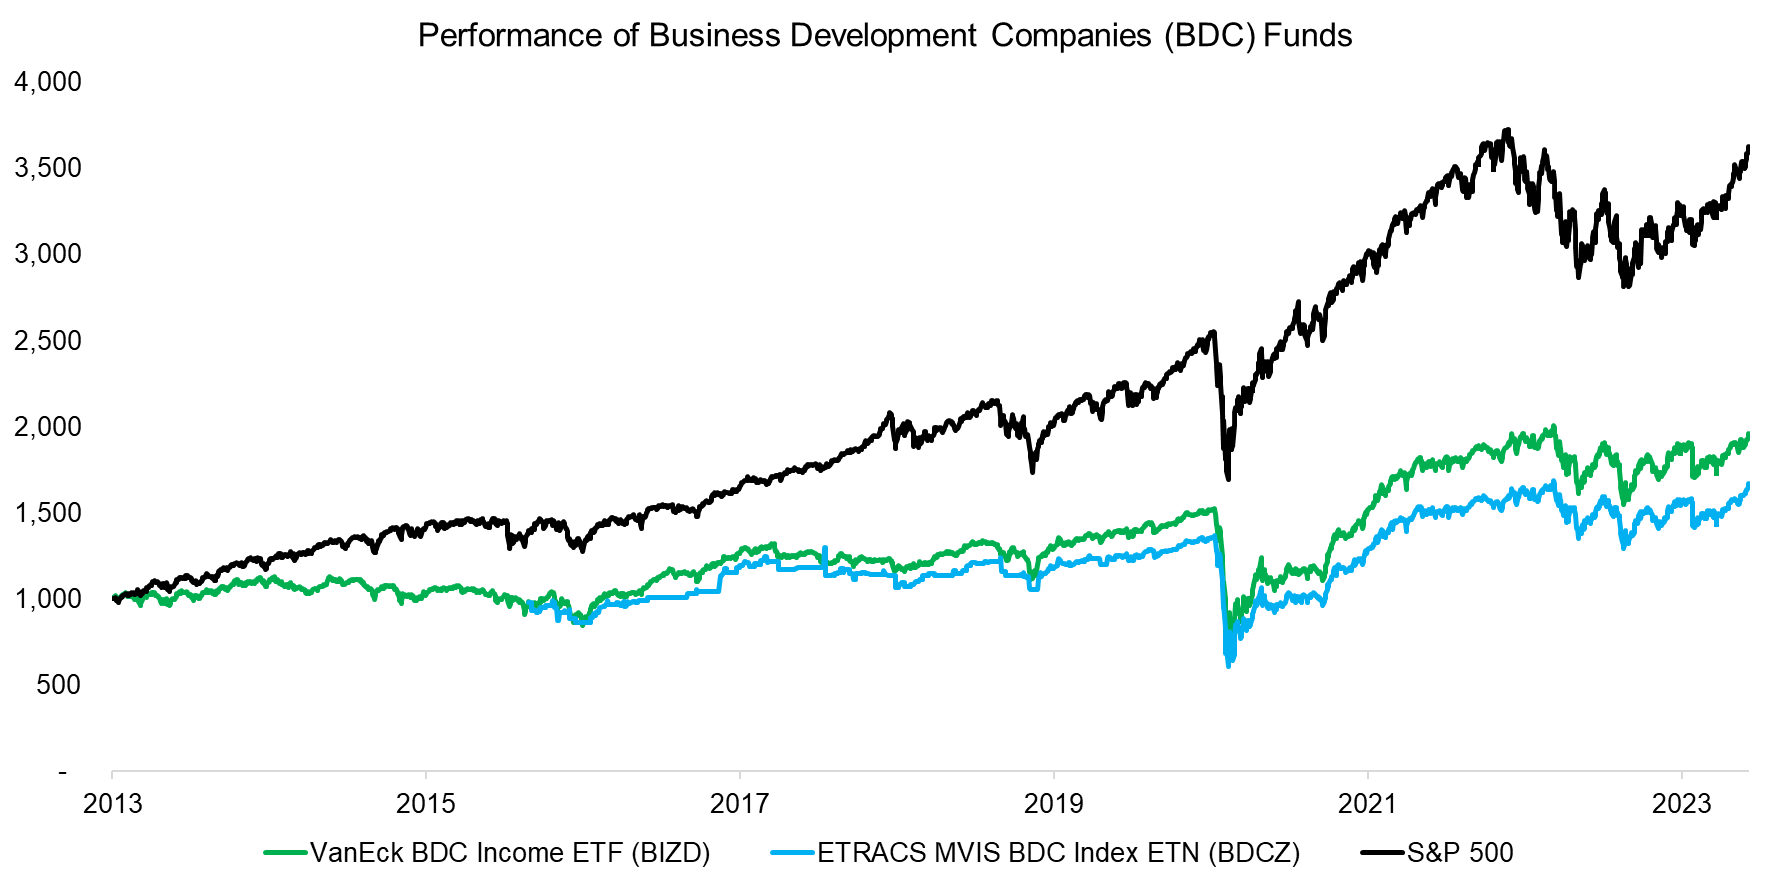 Performance of Business Development Companies (BDC) Funds